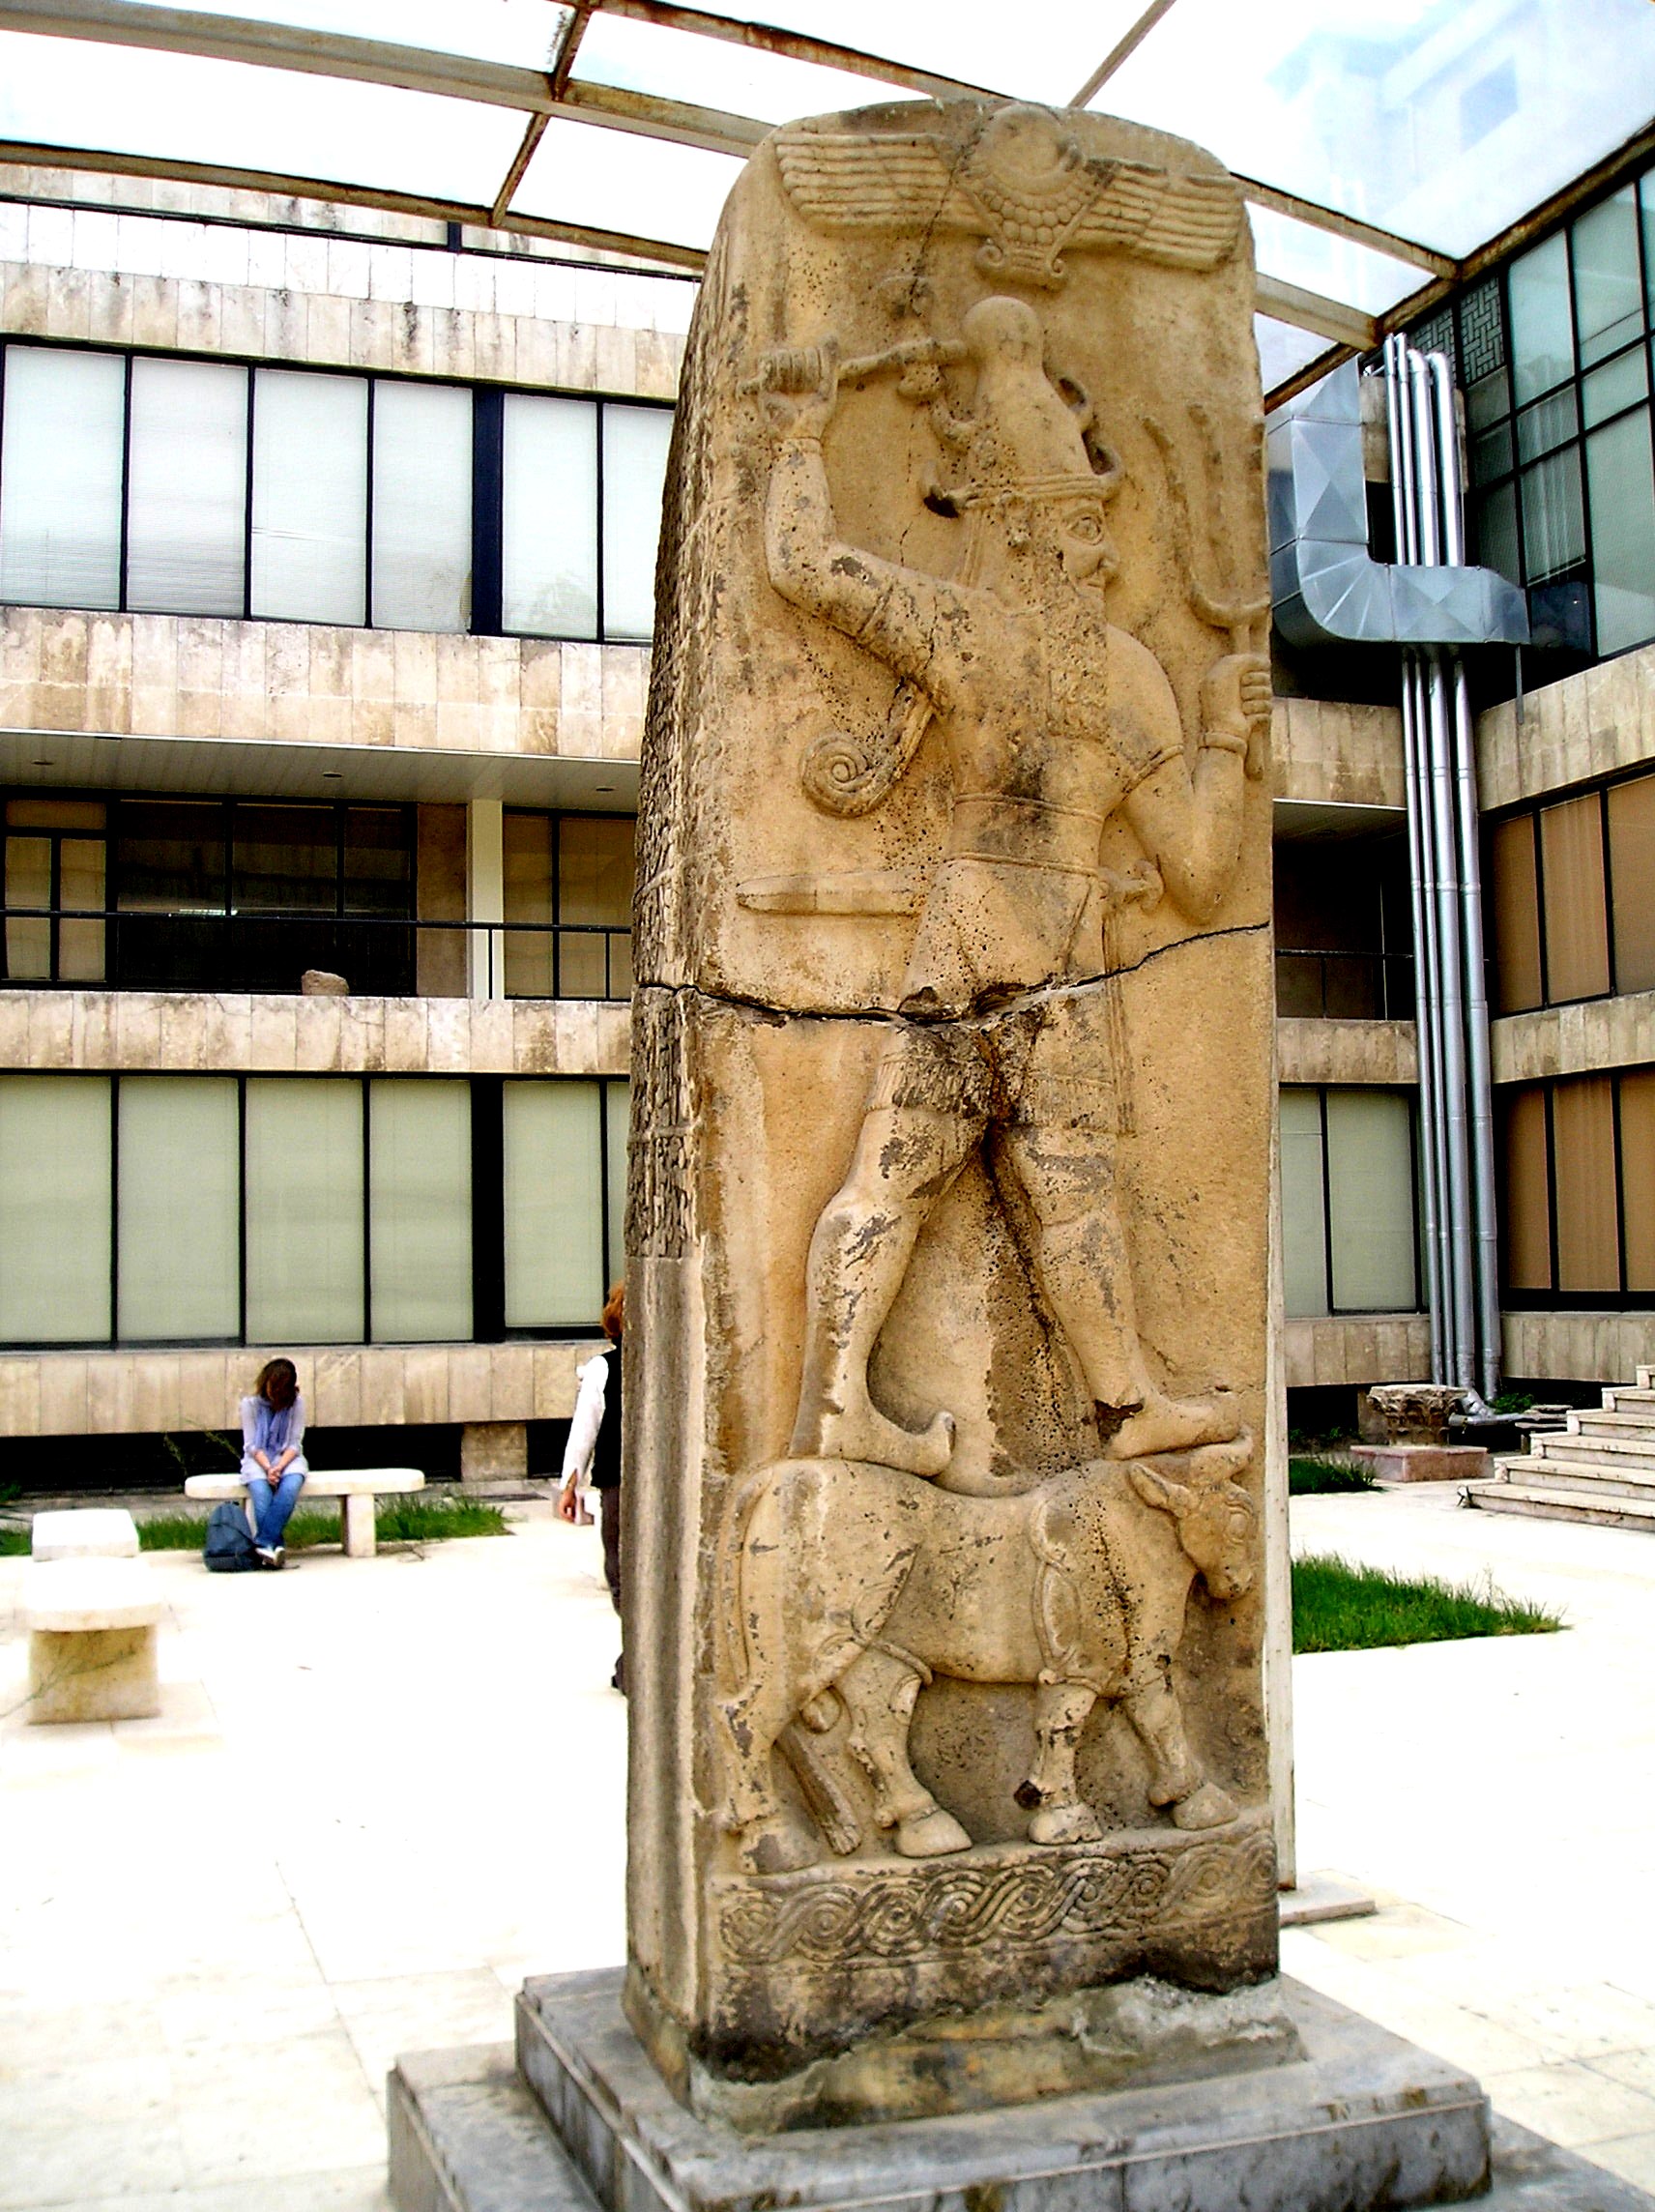 6 - stele of Adad in Aleppo below winged sky-disc / flying saucer of the gods, alien high-tech weapons; this artifact is now shamefully destroyed by radical Islam